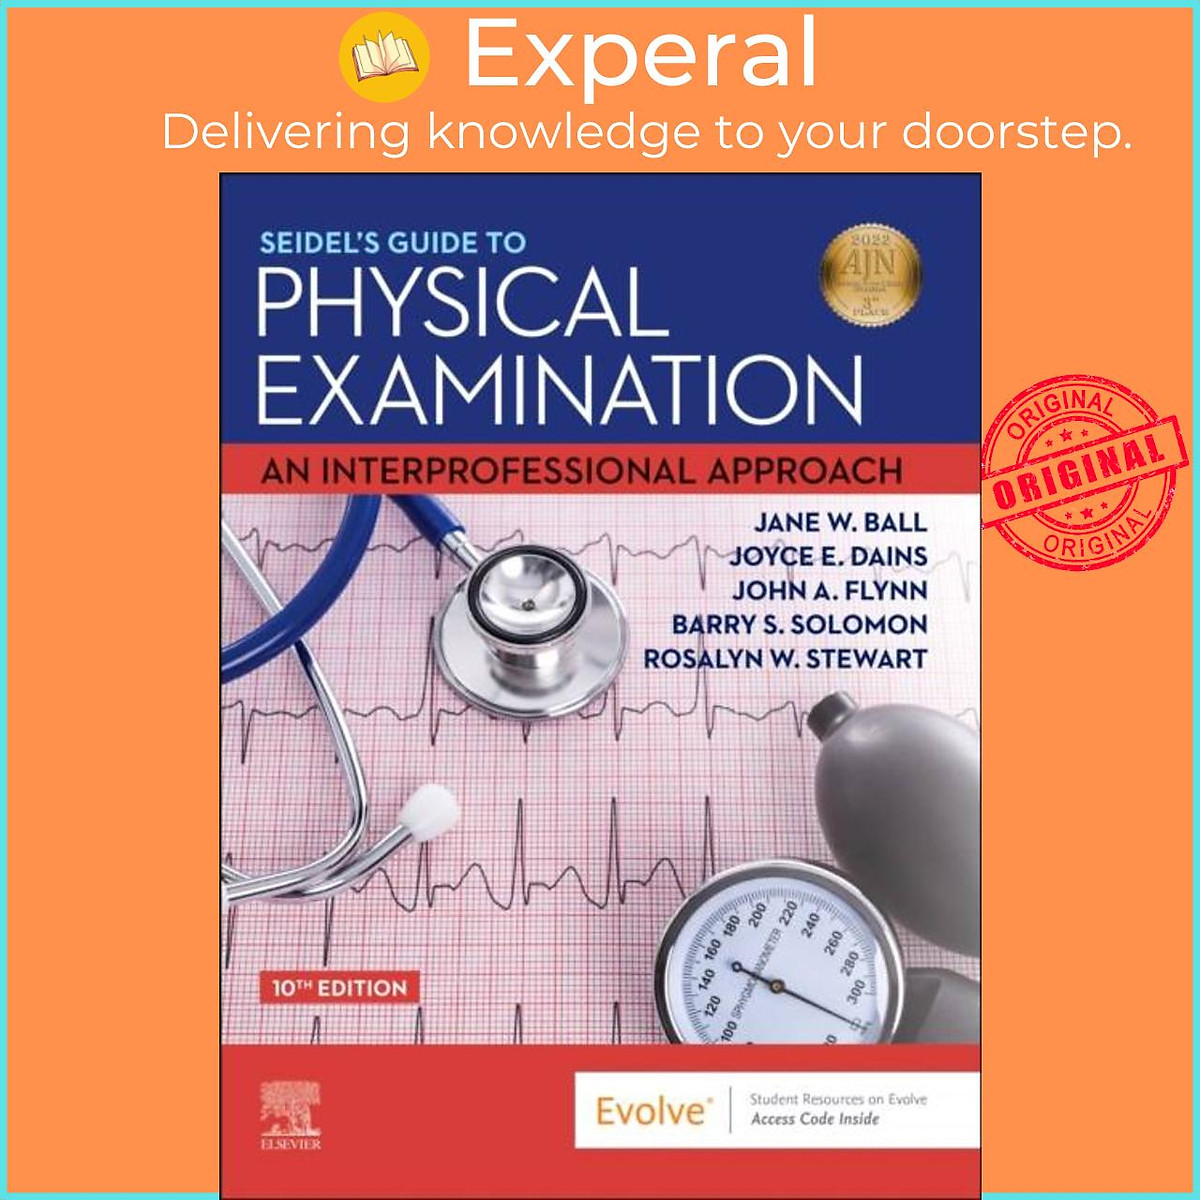 Sách - Seidel's Guide to Physical Examination - An Interprofessional Approach by Jane W. Ball (UK edition, hardcover)